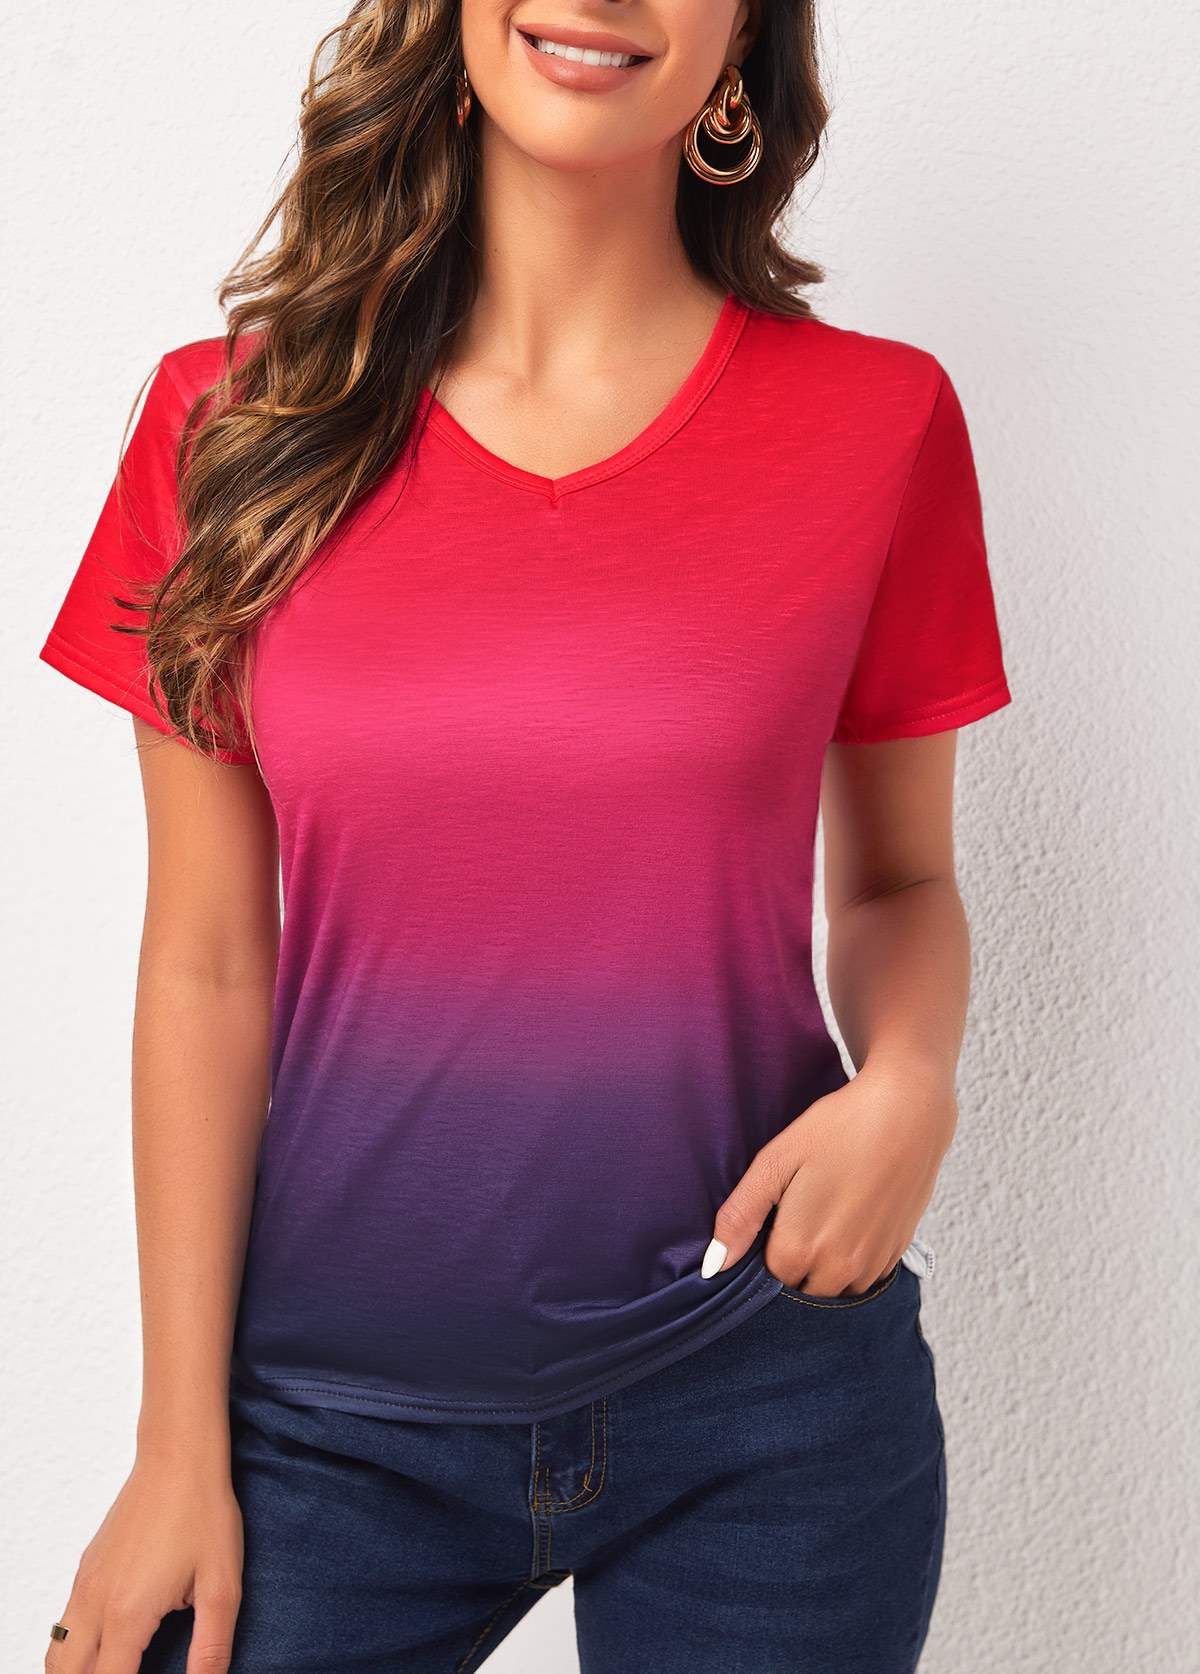 Short Sleeve Ombre Multi Color T Shirt